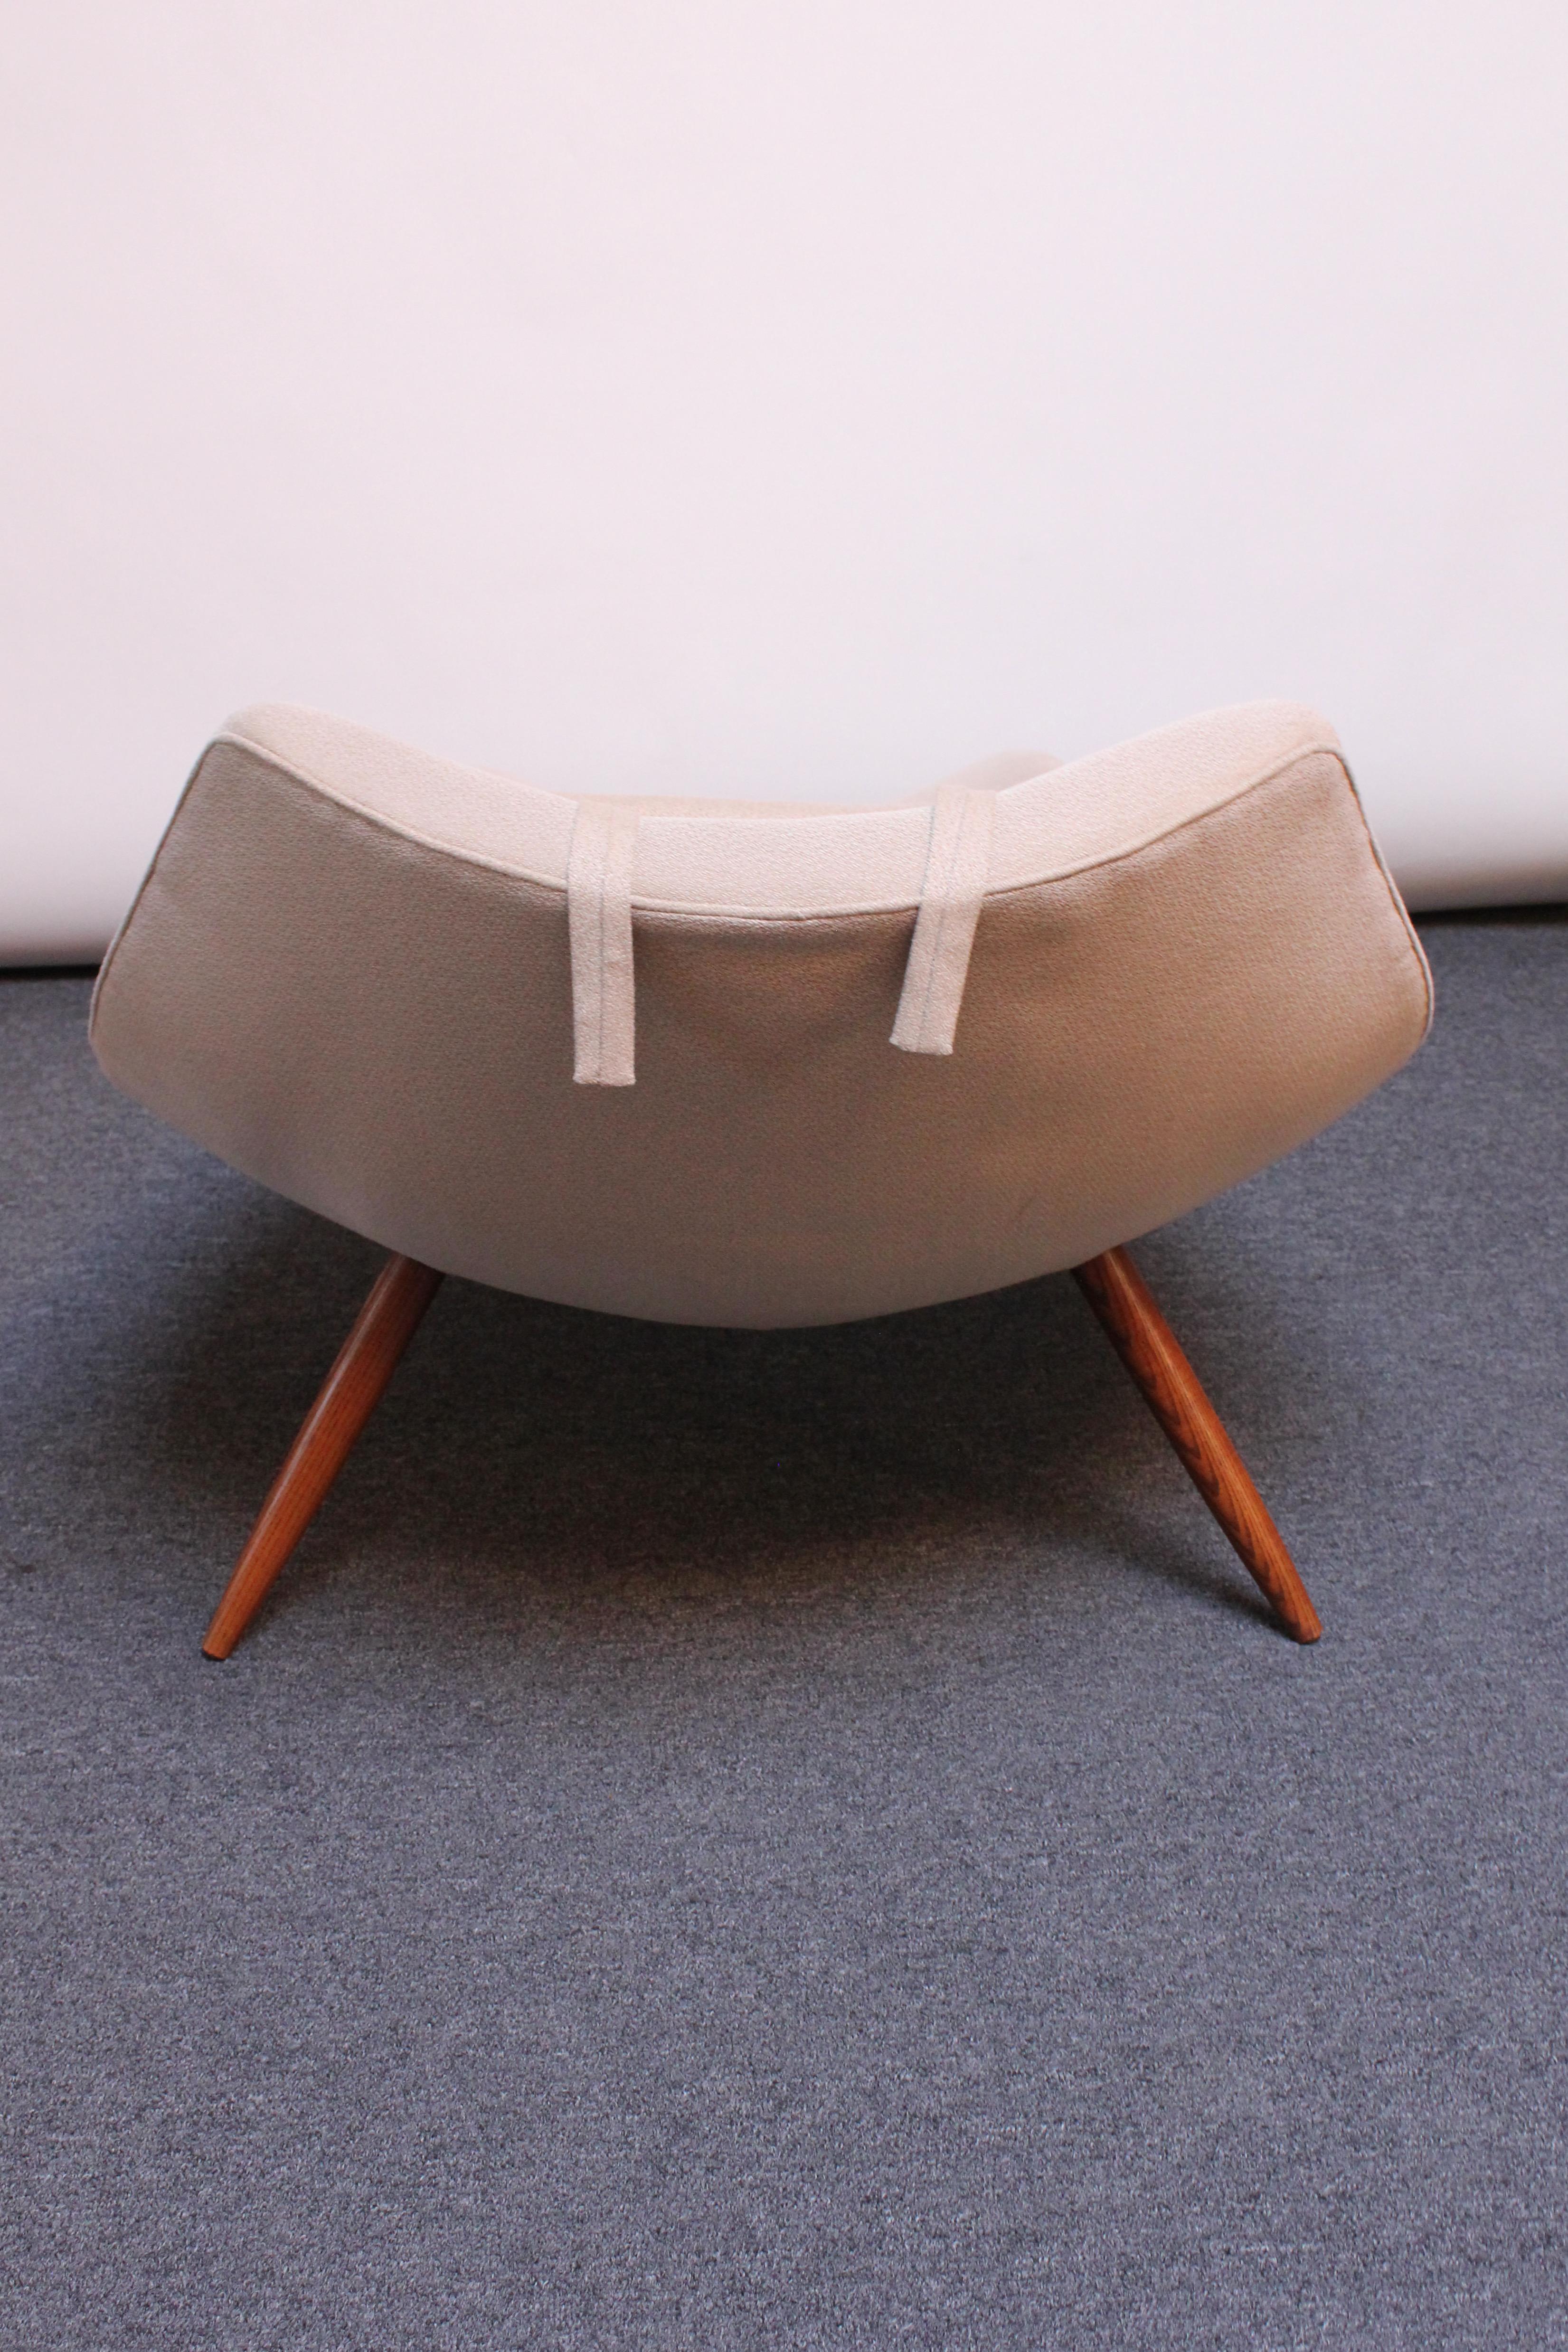 Vintage Sculptural Adrian Pearsall Chaise Lounge for Craft Associates 3